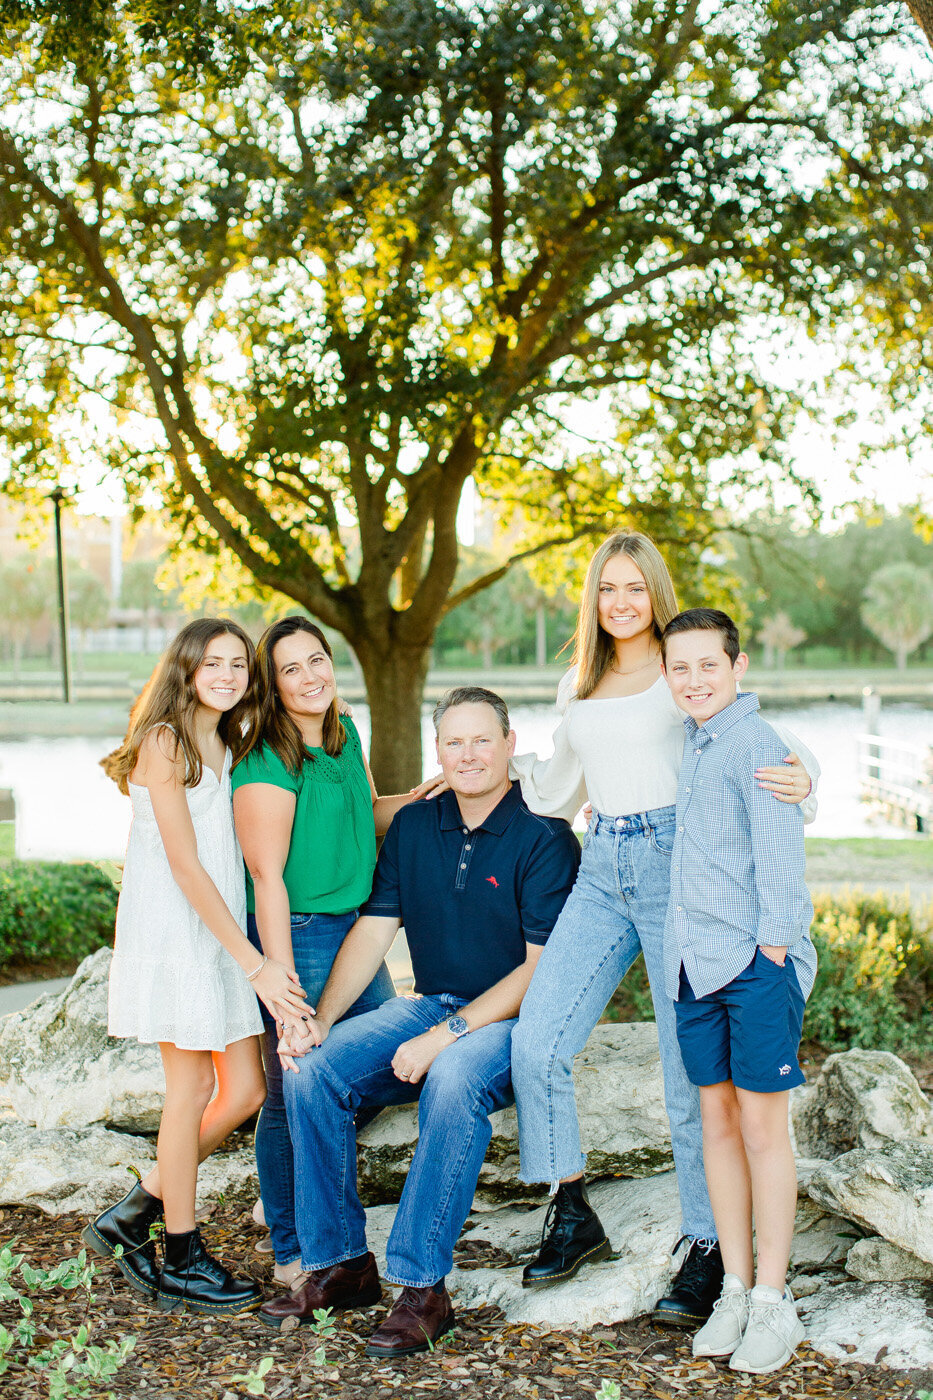 Tampa Family Photographer - Ailyn LaTorre 08